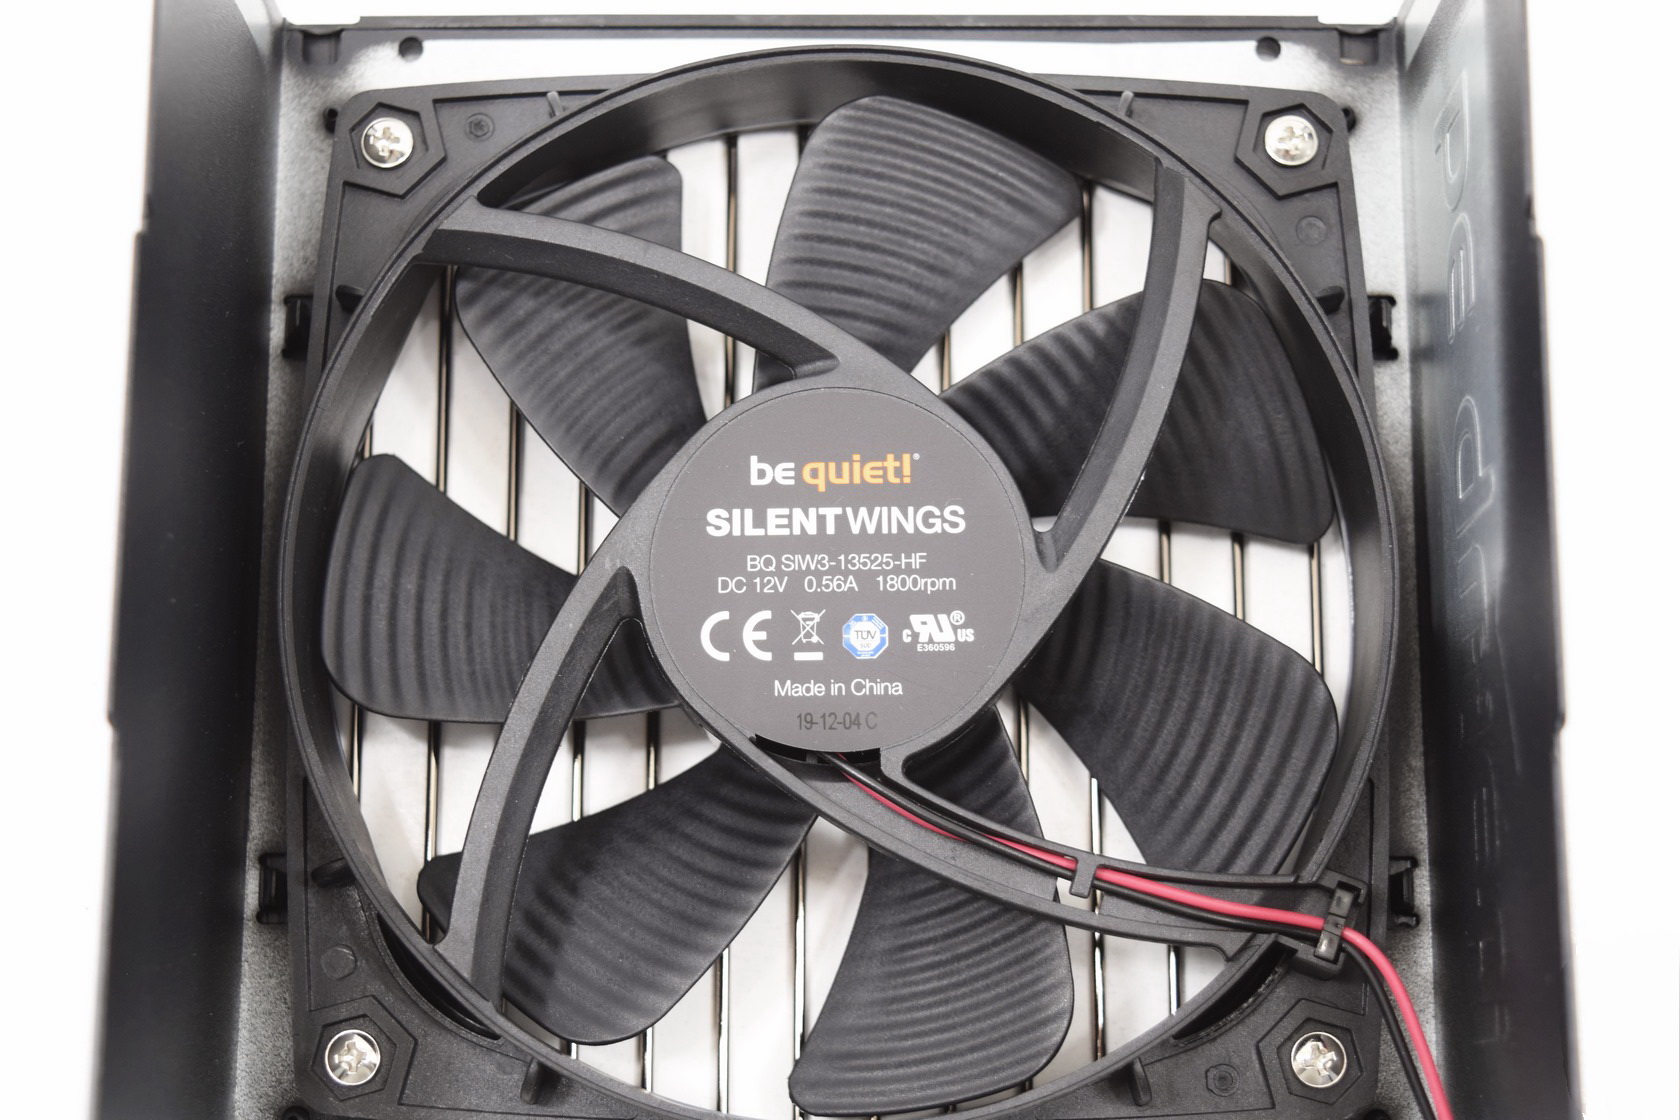 Final Words & Conclusion - The Be Quiet! Straight Power 11 750W PSU Review:  Excellent Quality, But Not Quiet